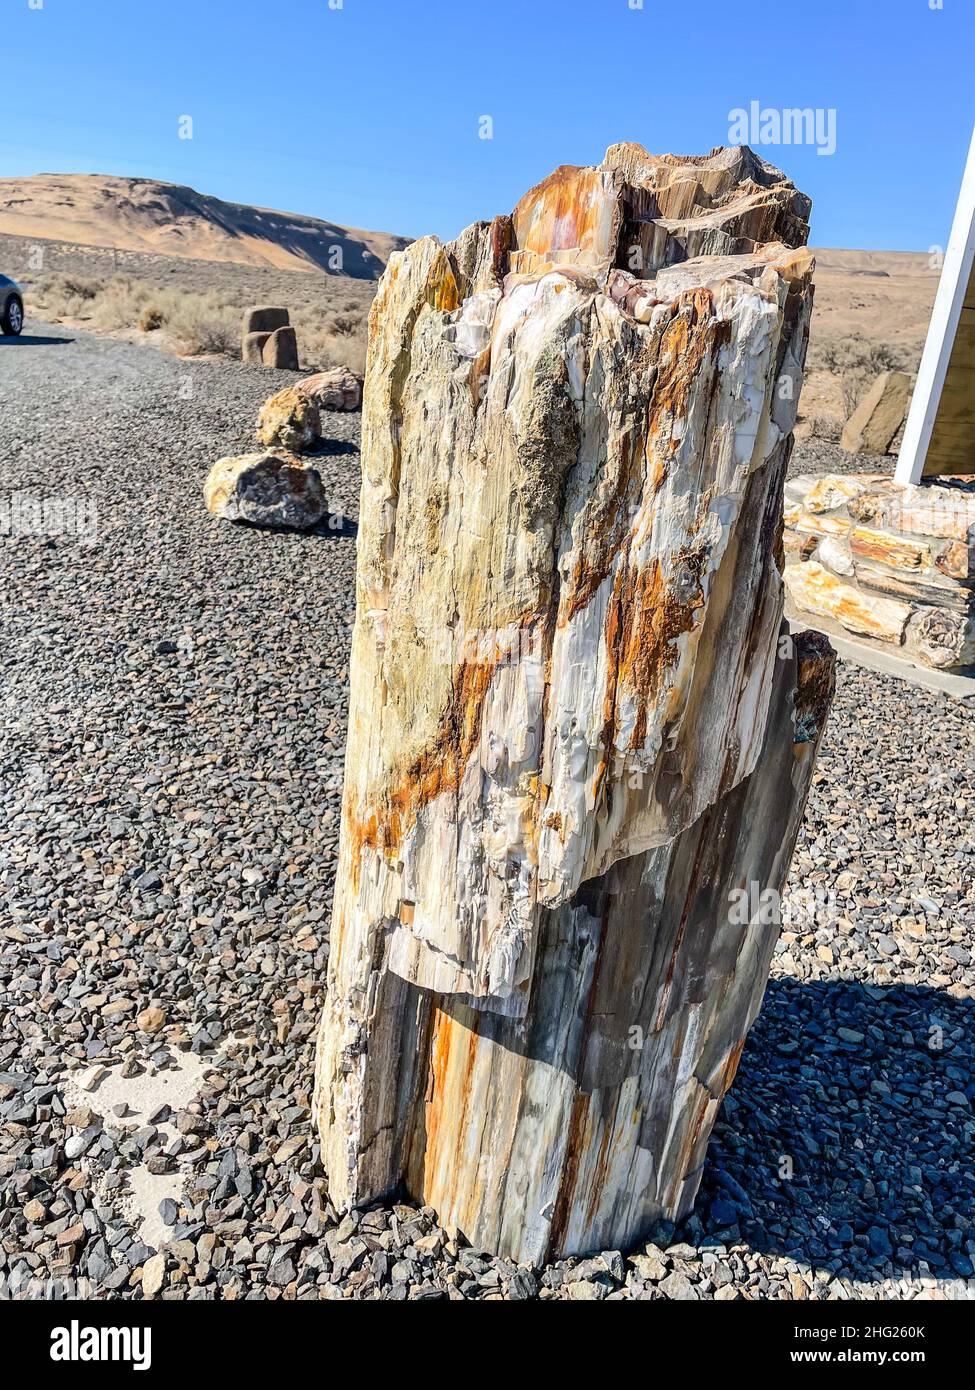 Ginkgo Petrified Forest State Park/Wanapum Recreational Area is a geologic preserve and public recreation area covering 7,124-acre (2,883 ha) on the w Stock Photo